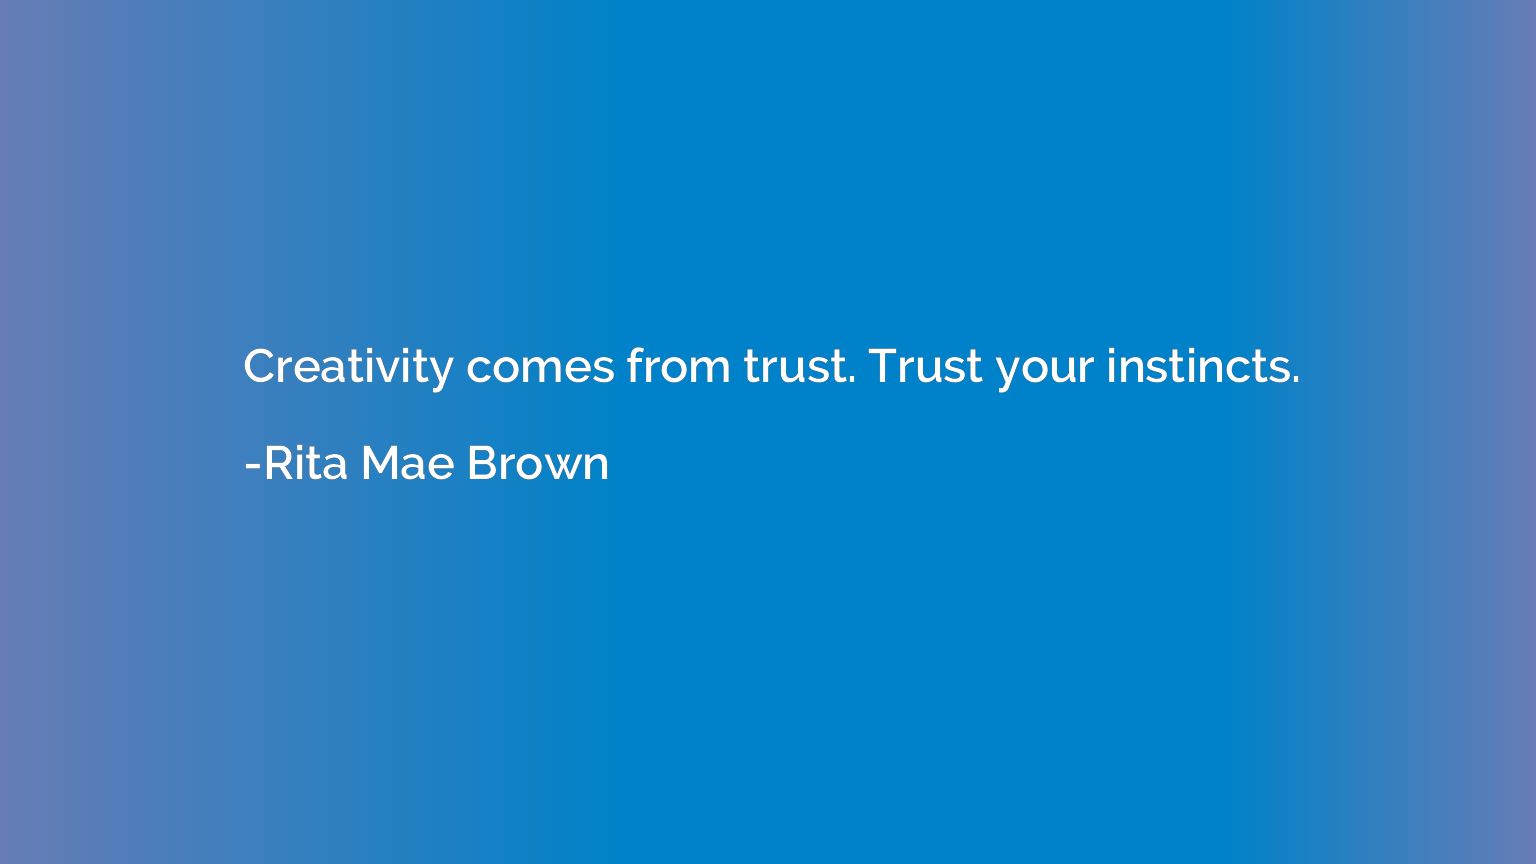 Creativity comes from trust. Trust your instincts.